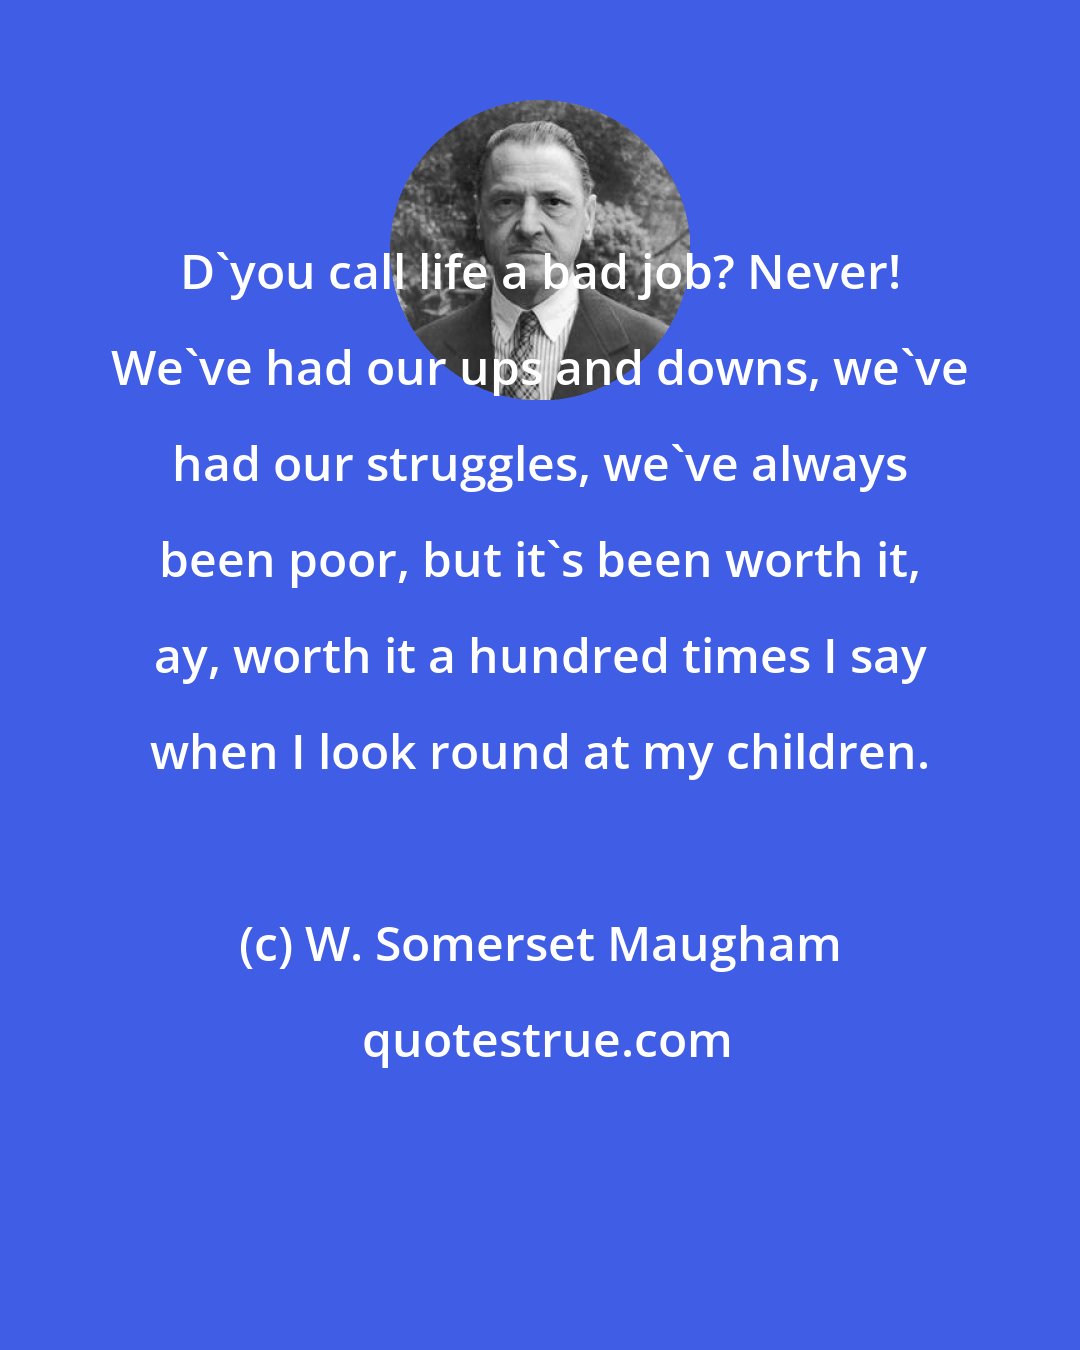 W. Somerset Maugham: D'you call life a bad job? Never! We've had our ups and downs, we've had our struggles, we've always been poor, but it's been worth it, ay, worth it a hundred times I say when I look round at my children.